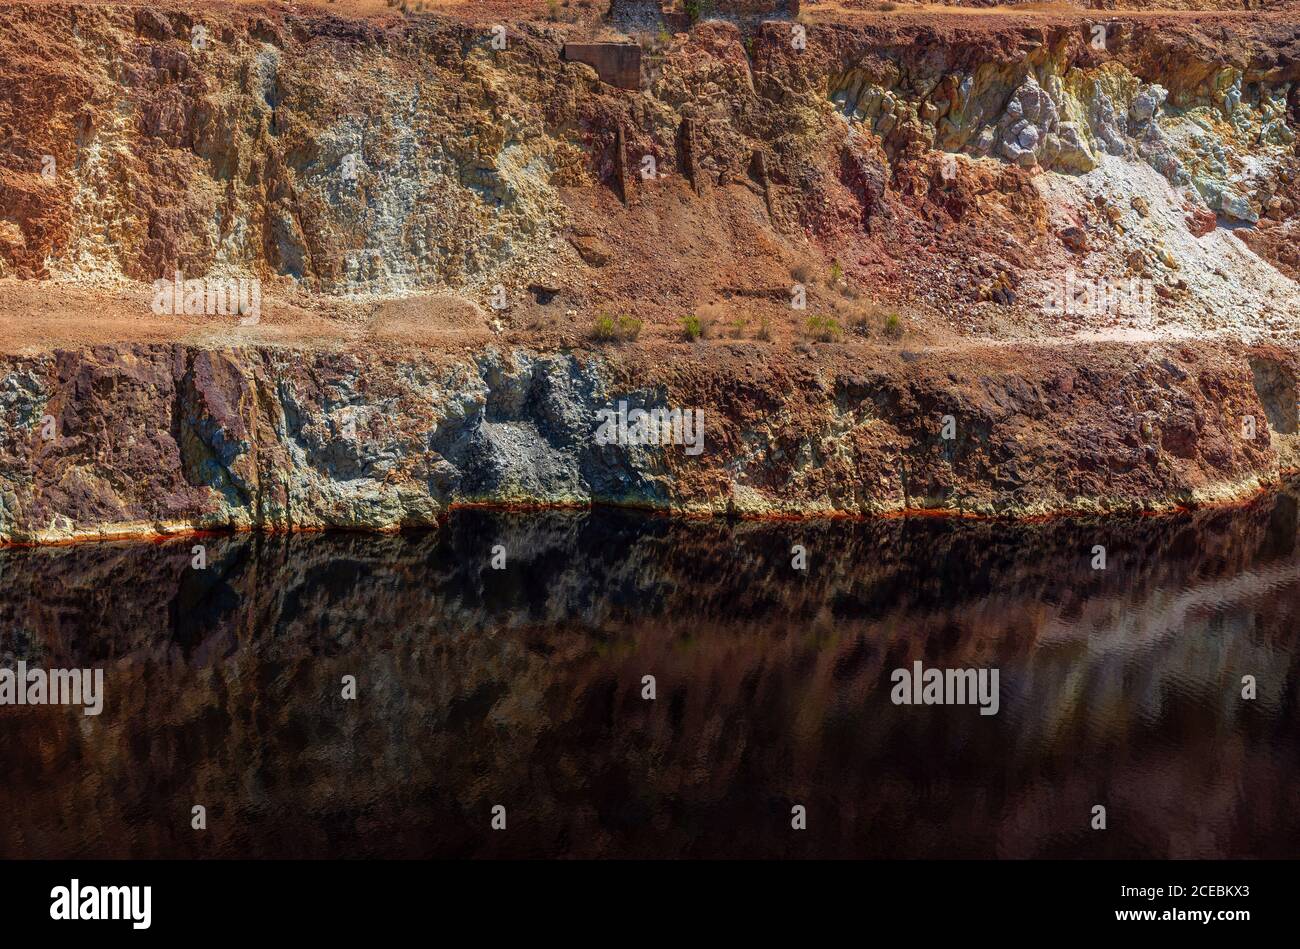 Calm surface of water near slope of quarry in Santo Domingos Mine, Portugal Stock Photo